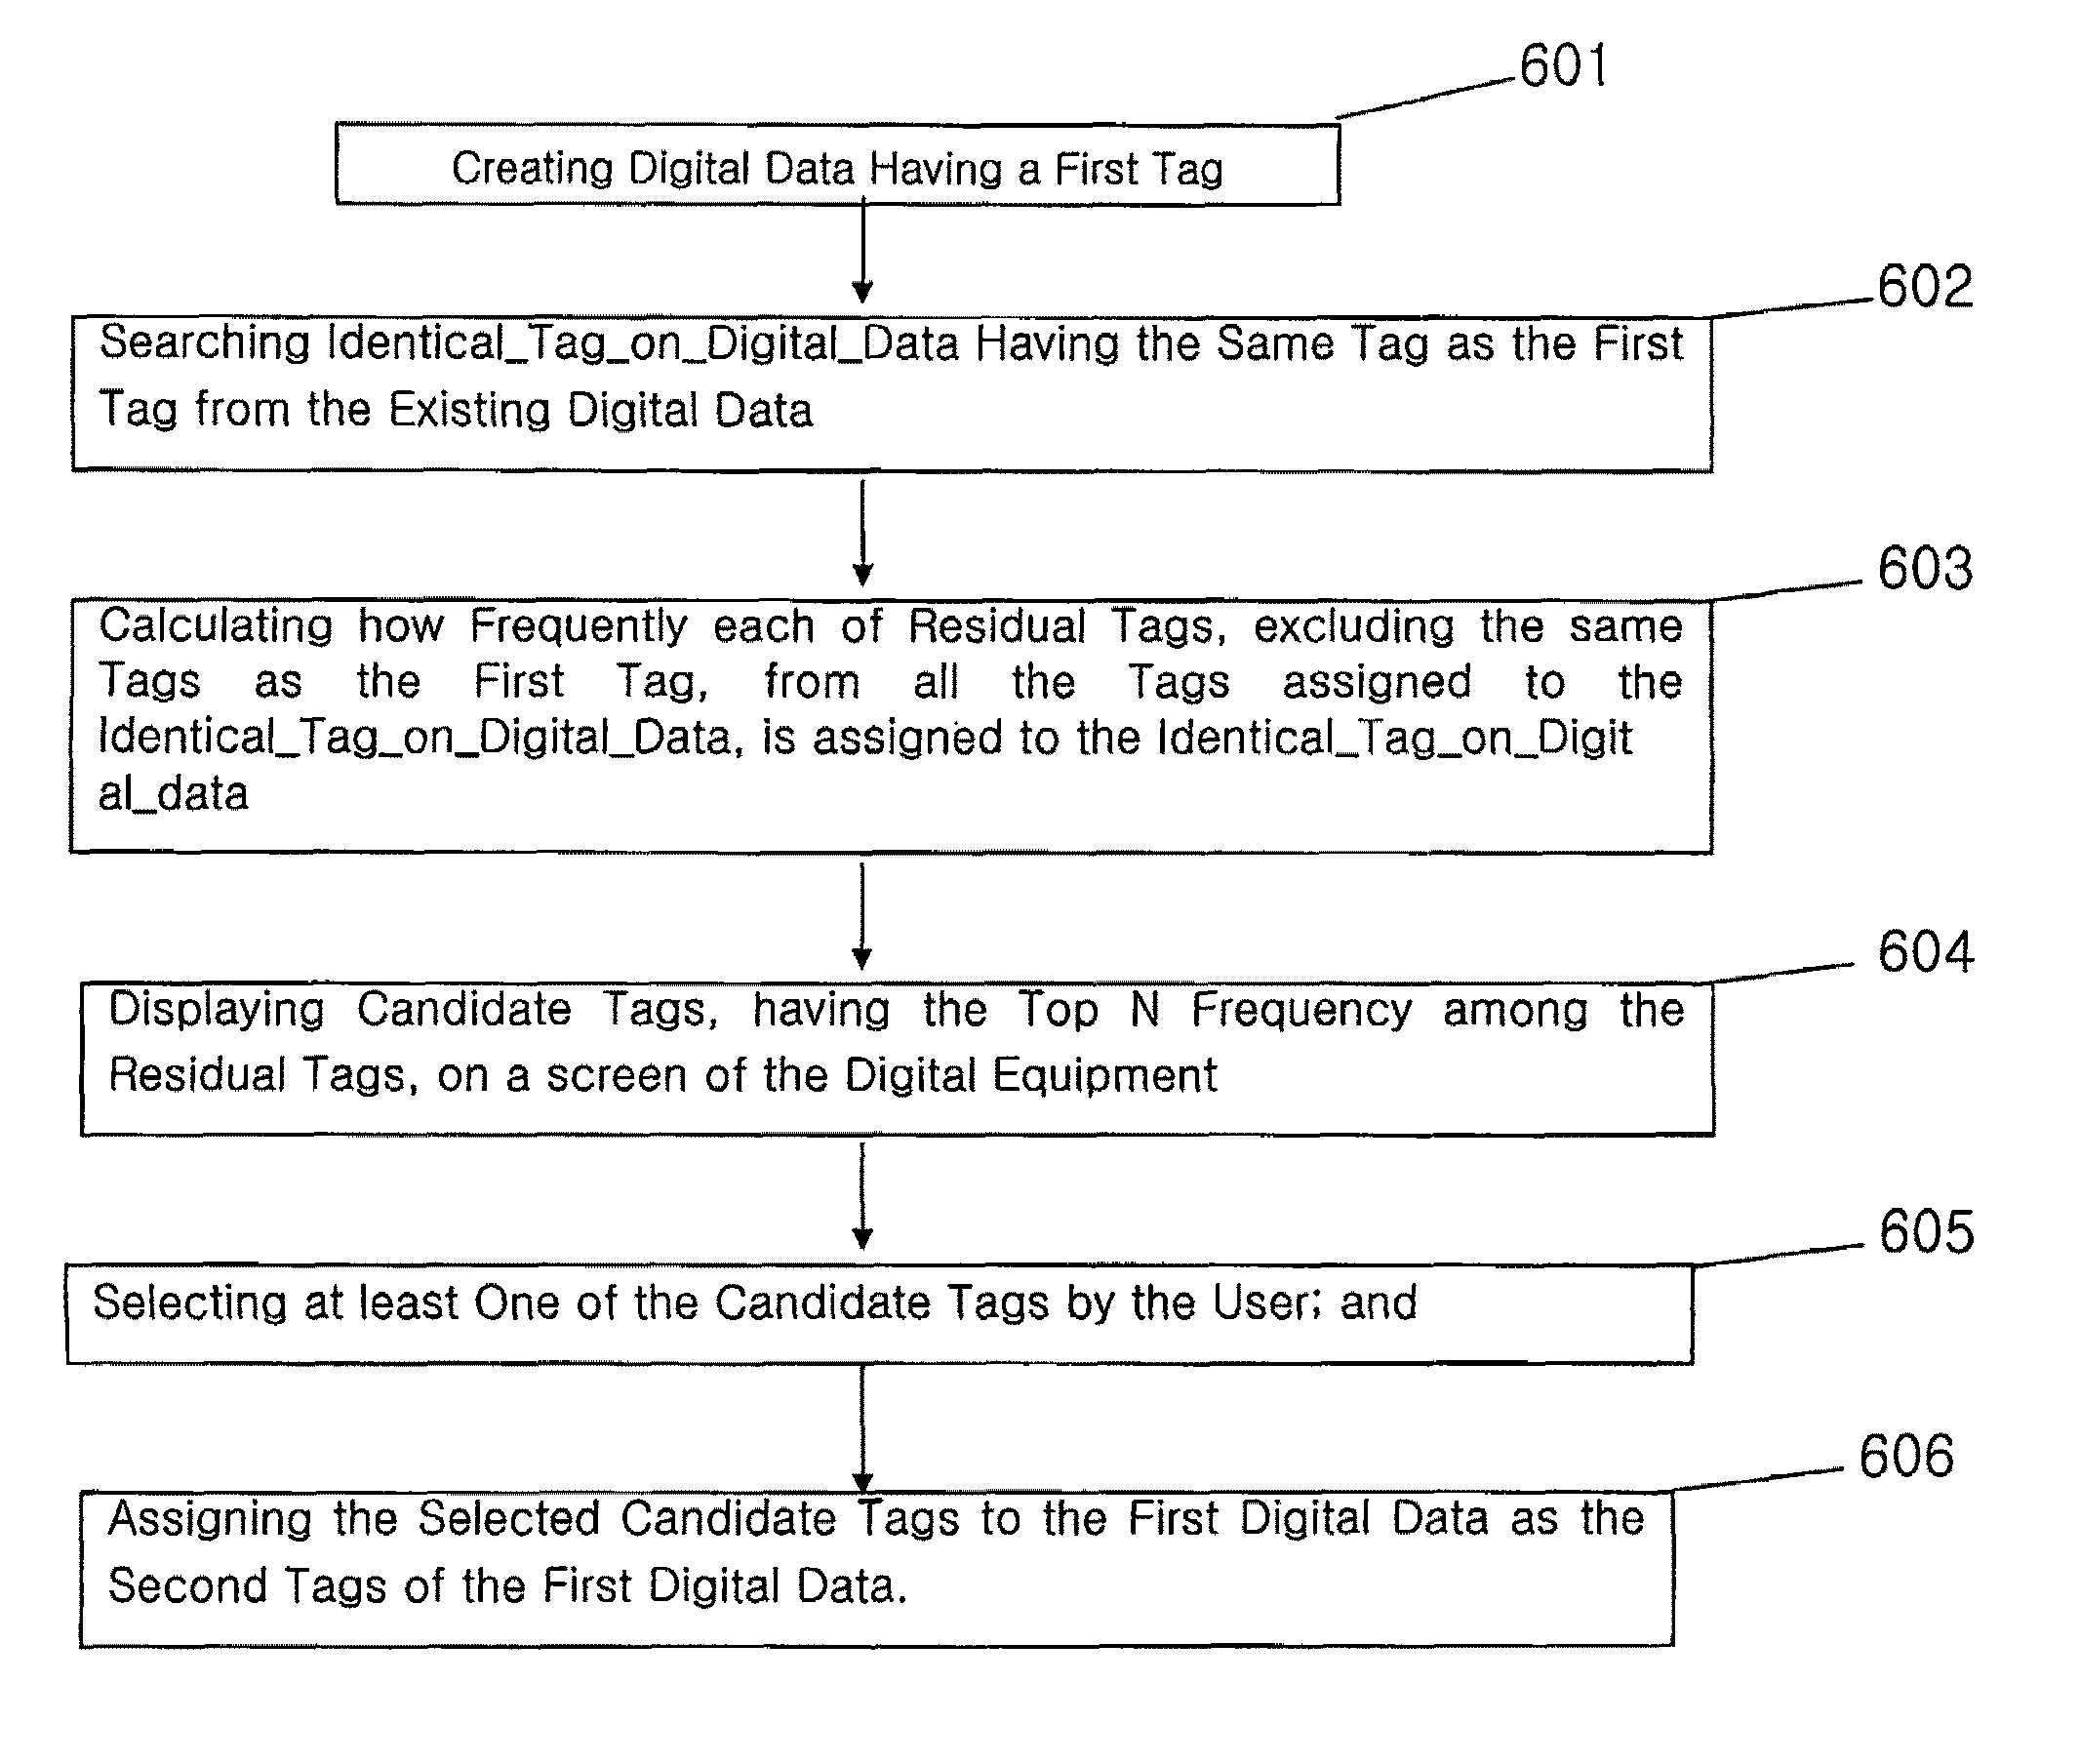 Methods for tagging person identification information to digital data and recommending additional tag by using decision fusion